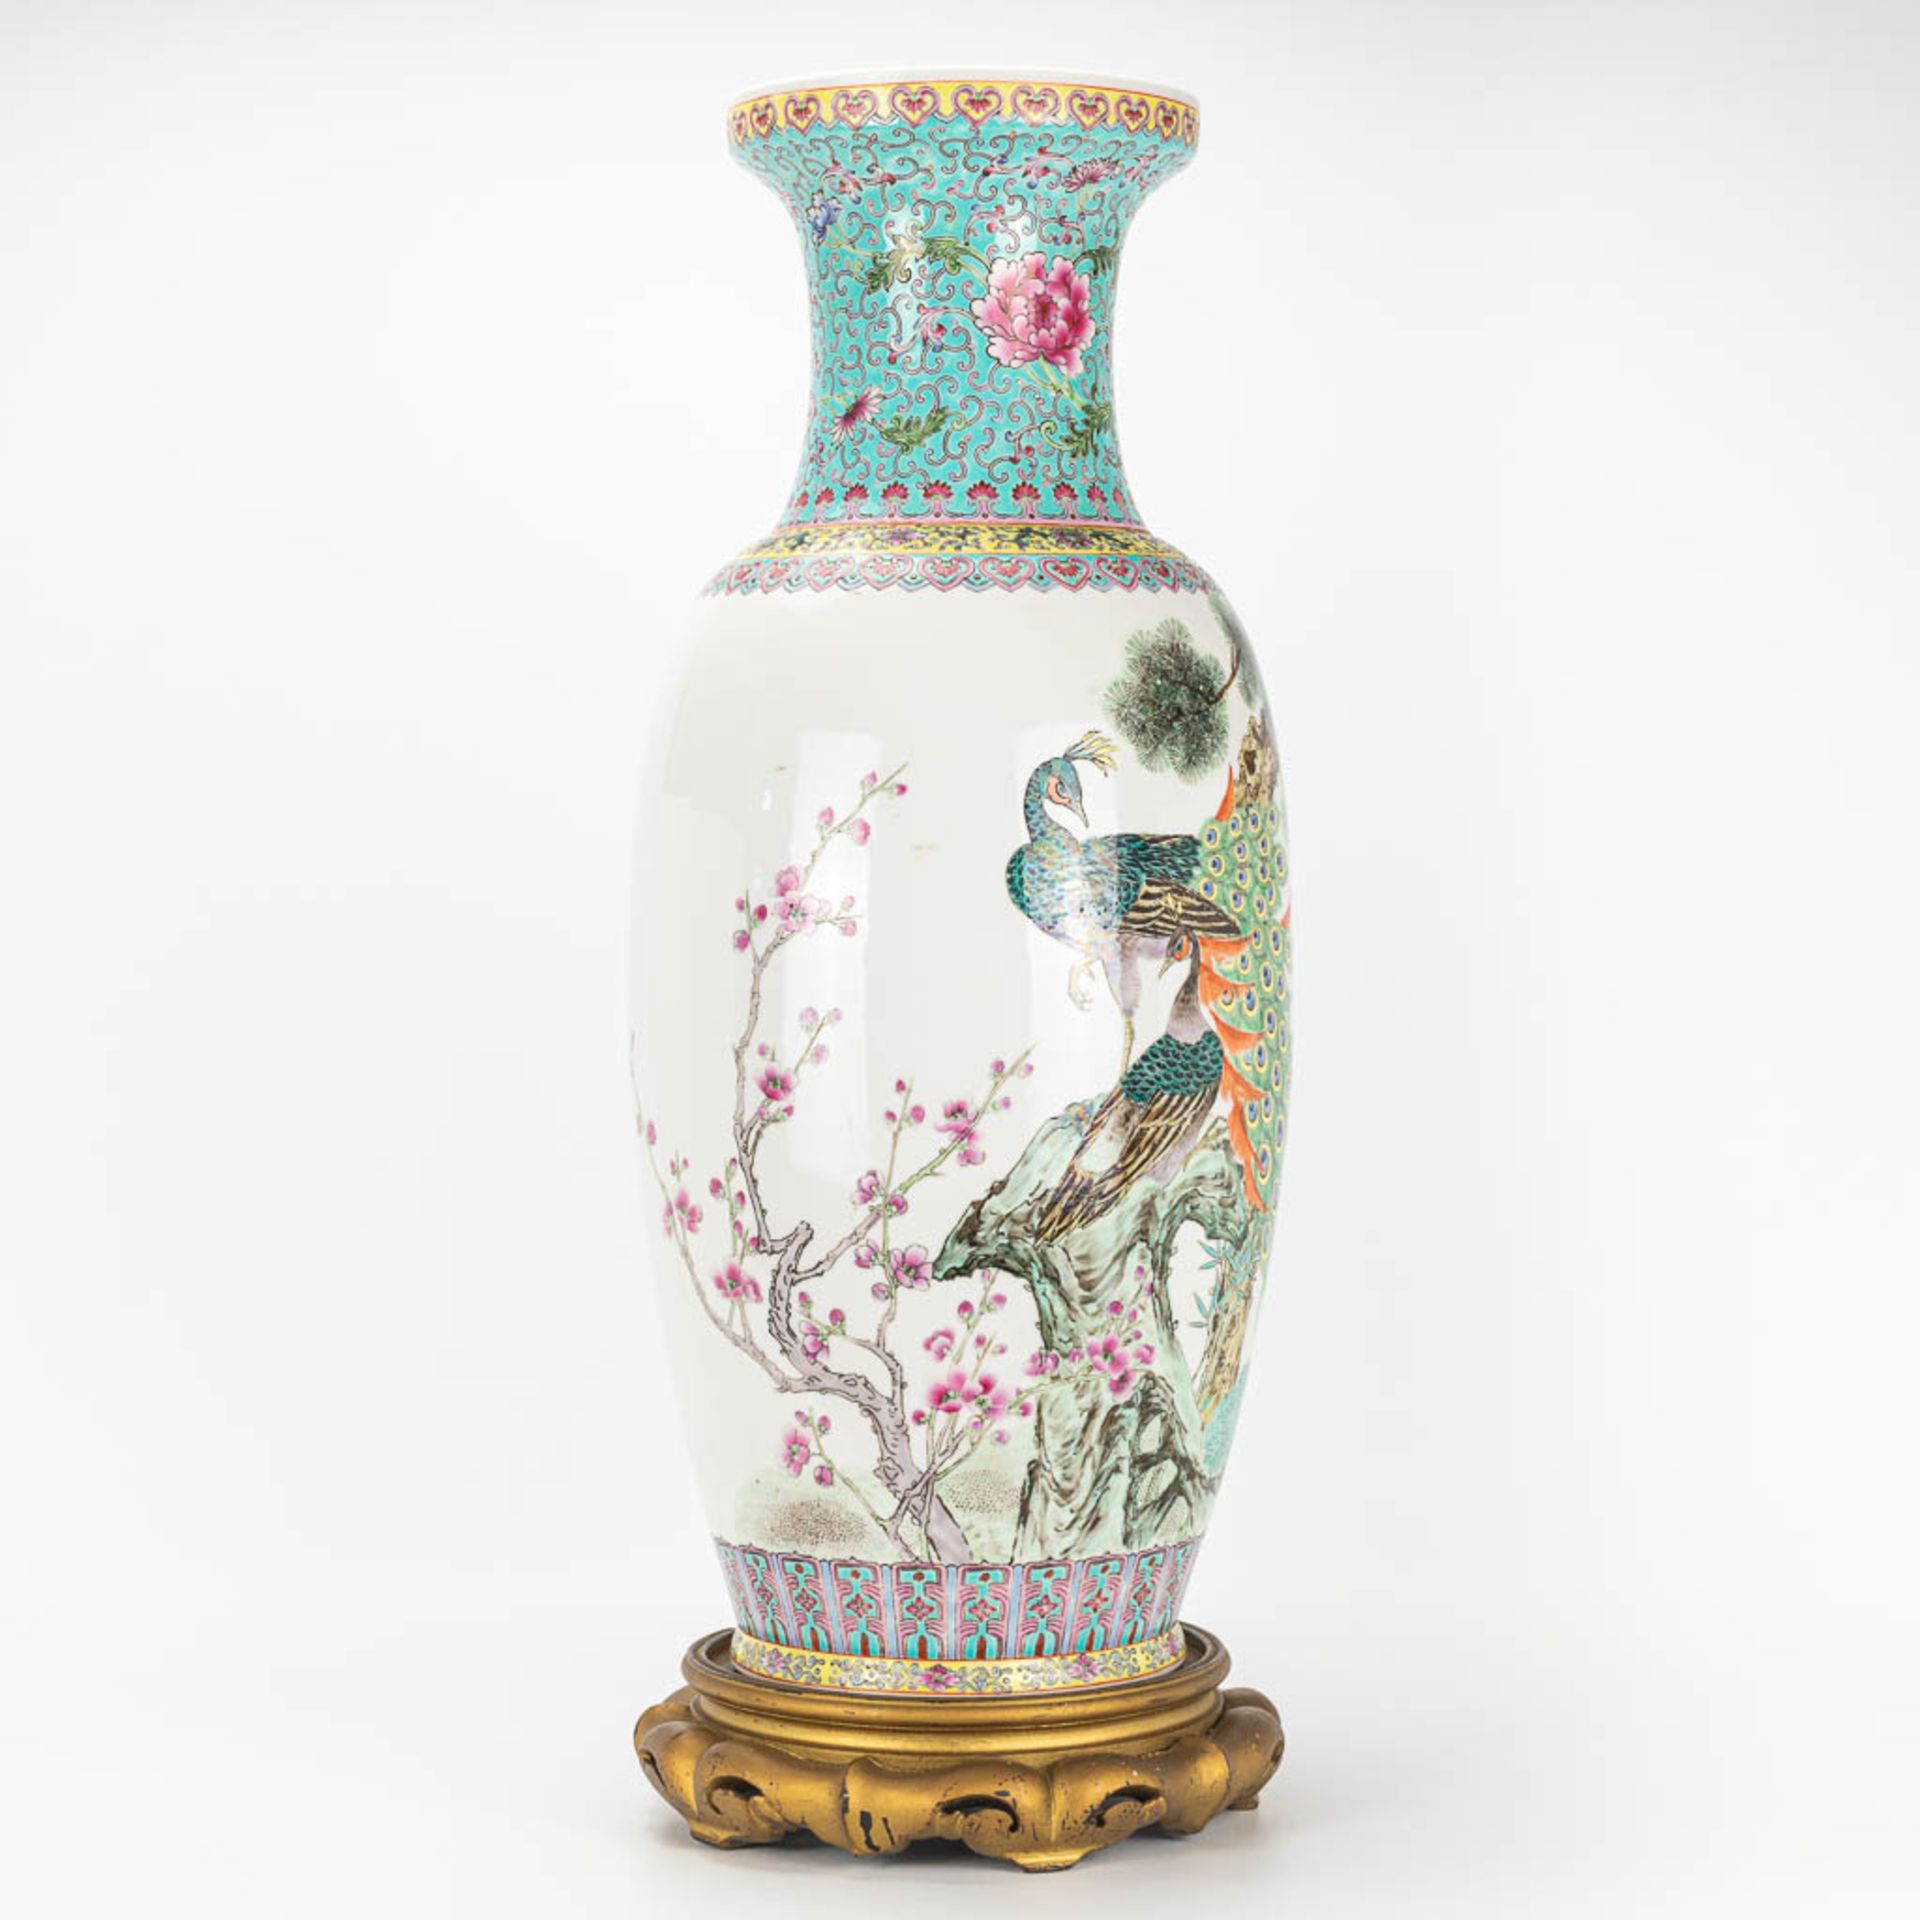 A vase made of Chinese porcelain and decorated with peacocks - Image 4 of 16